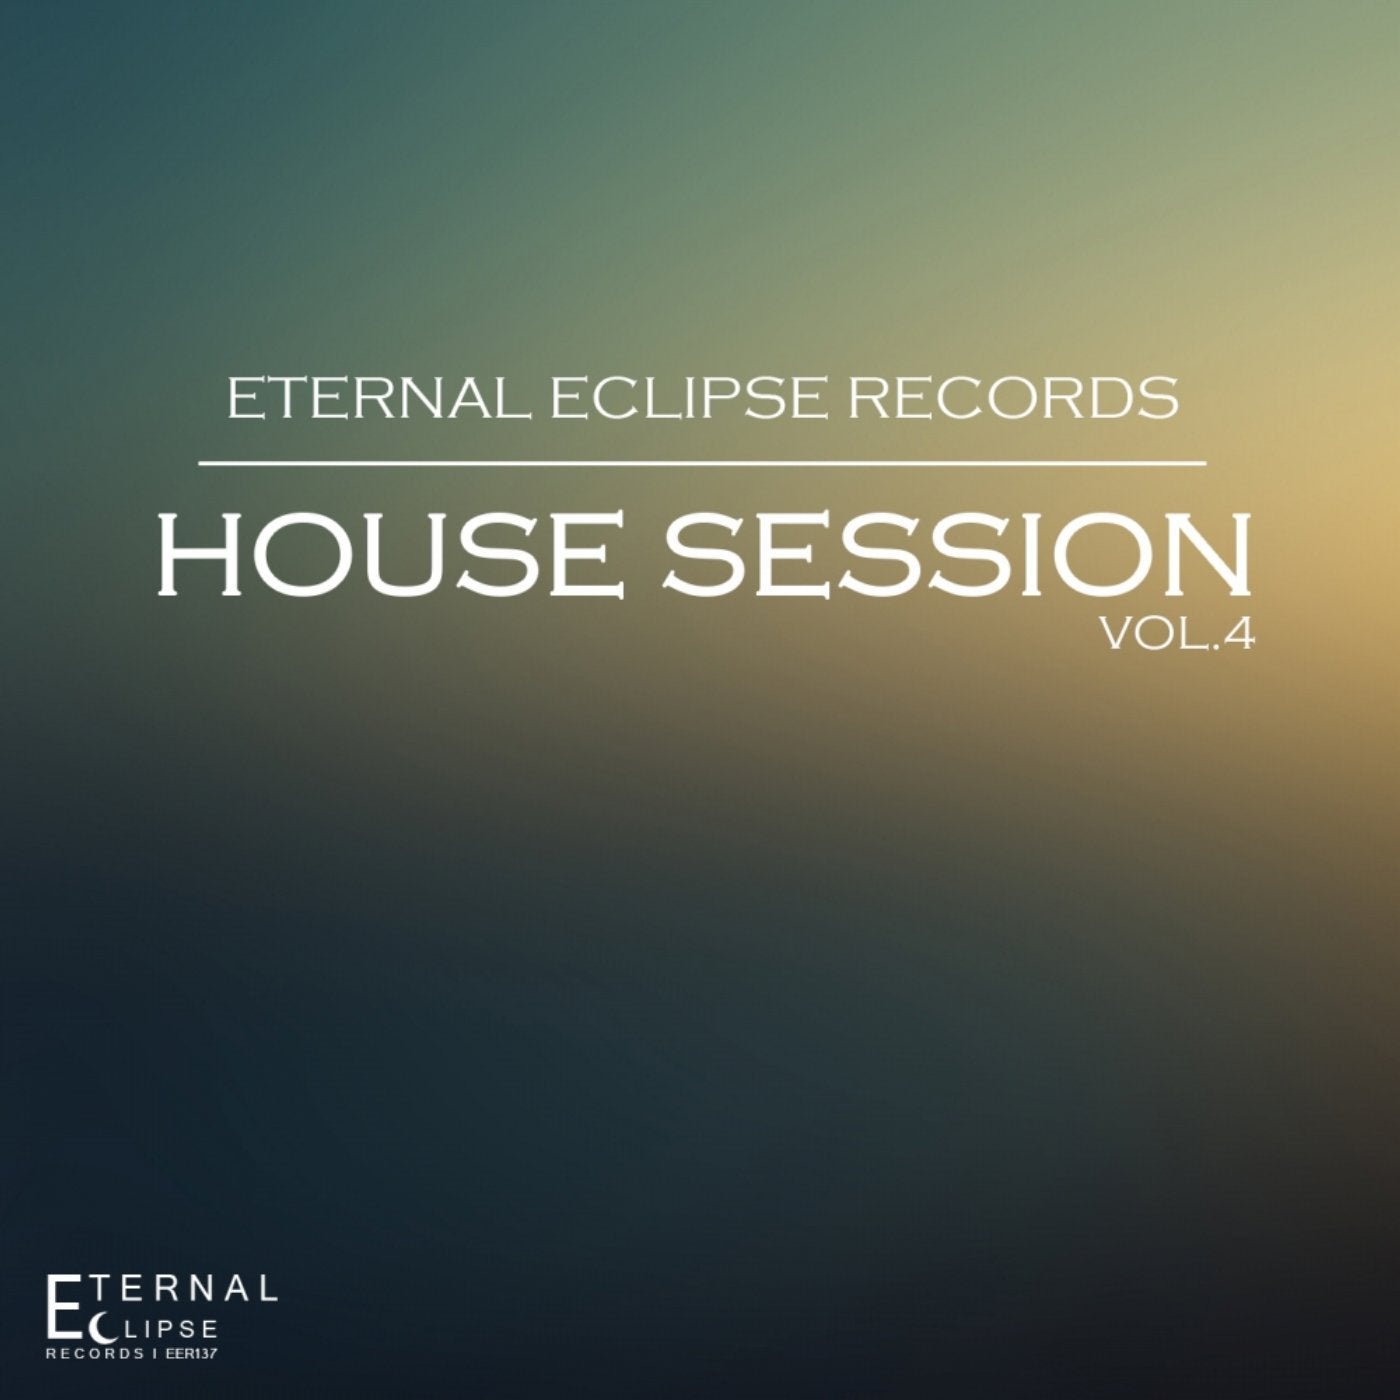 Eternal Eclipse Records: House Session, Vol. 4